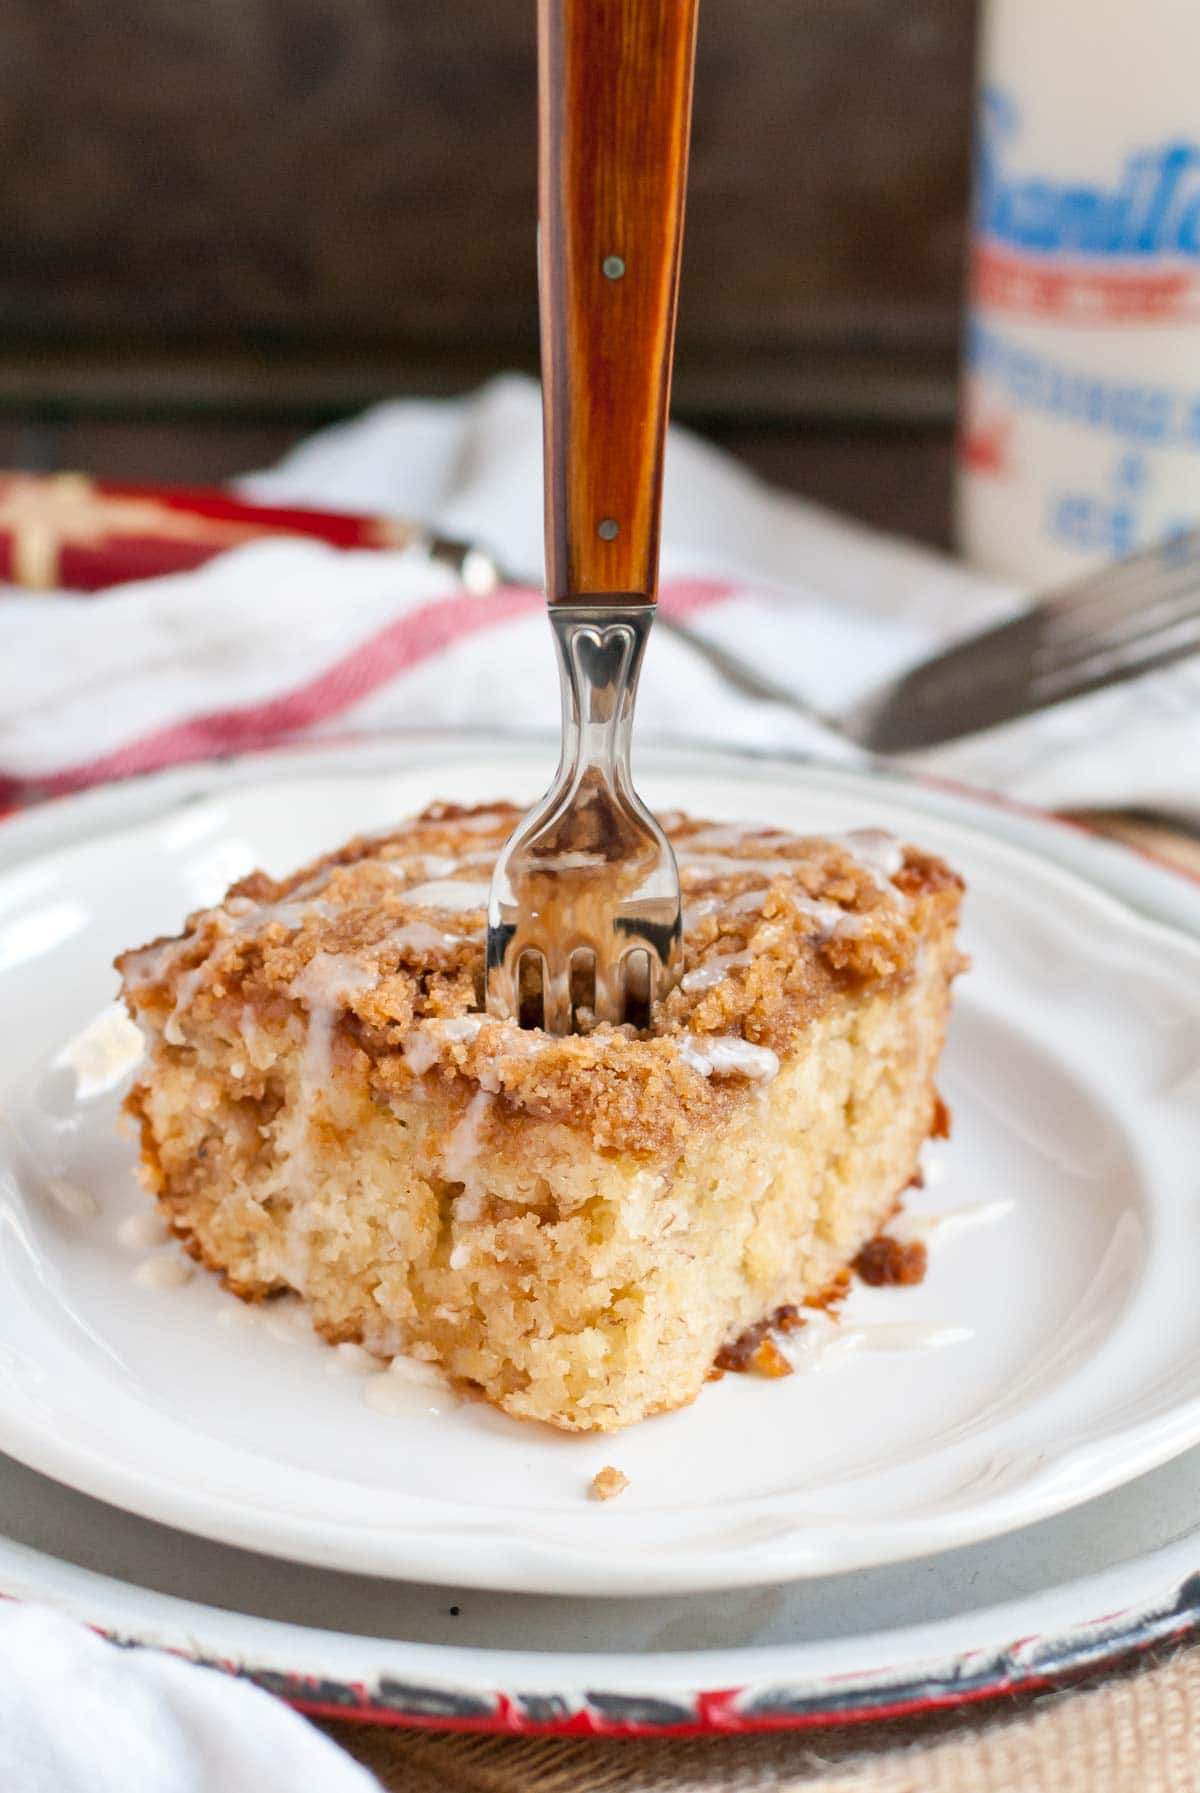 This Banana Crumb Cake is easy to make and wonderful for breakfast or dessert.